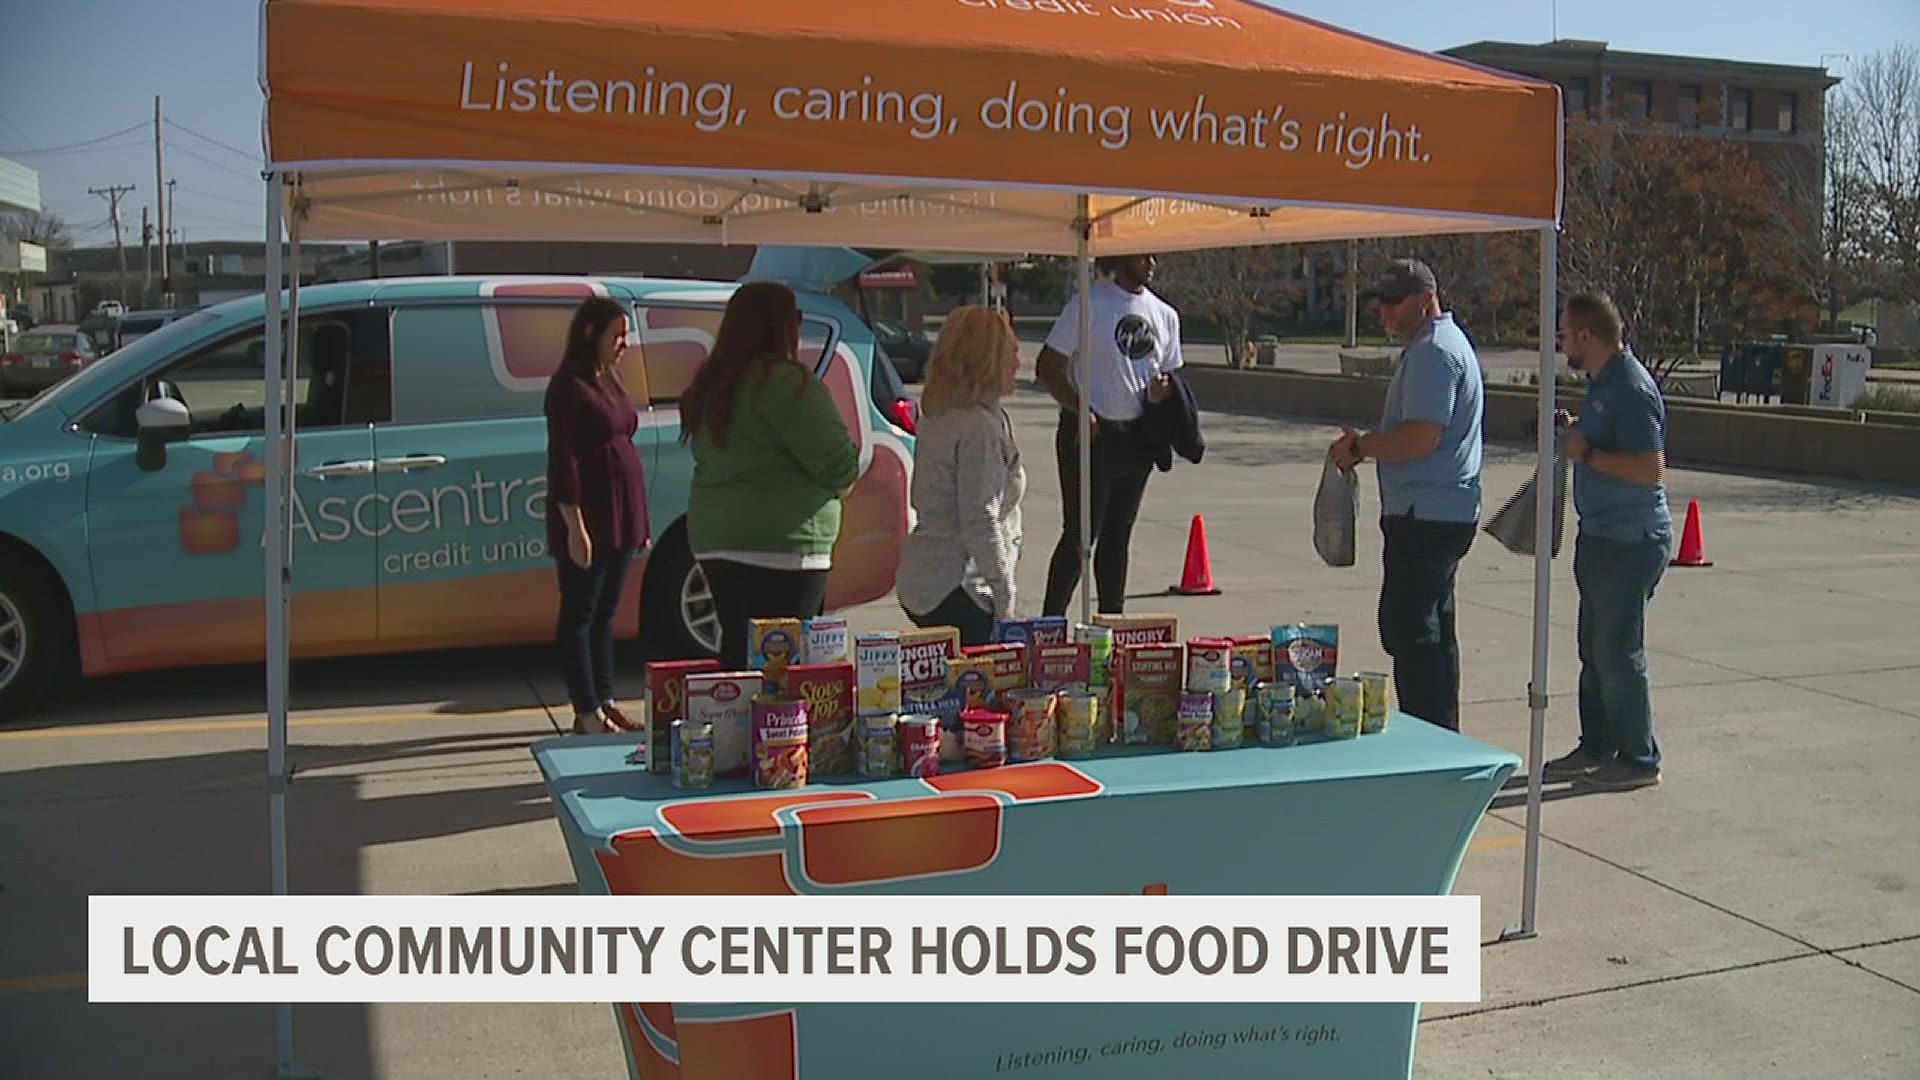 Ascentra Credit Union and TMBC at Lincoln Center are partnering up to host a community food drive through Nov. 15. Here's how you can help.